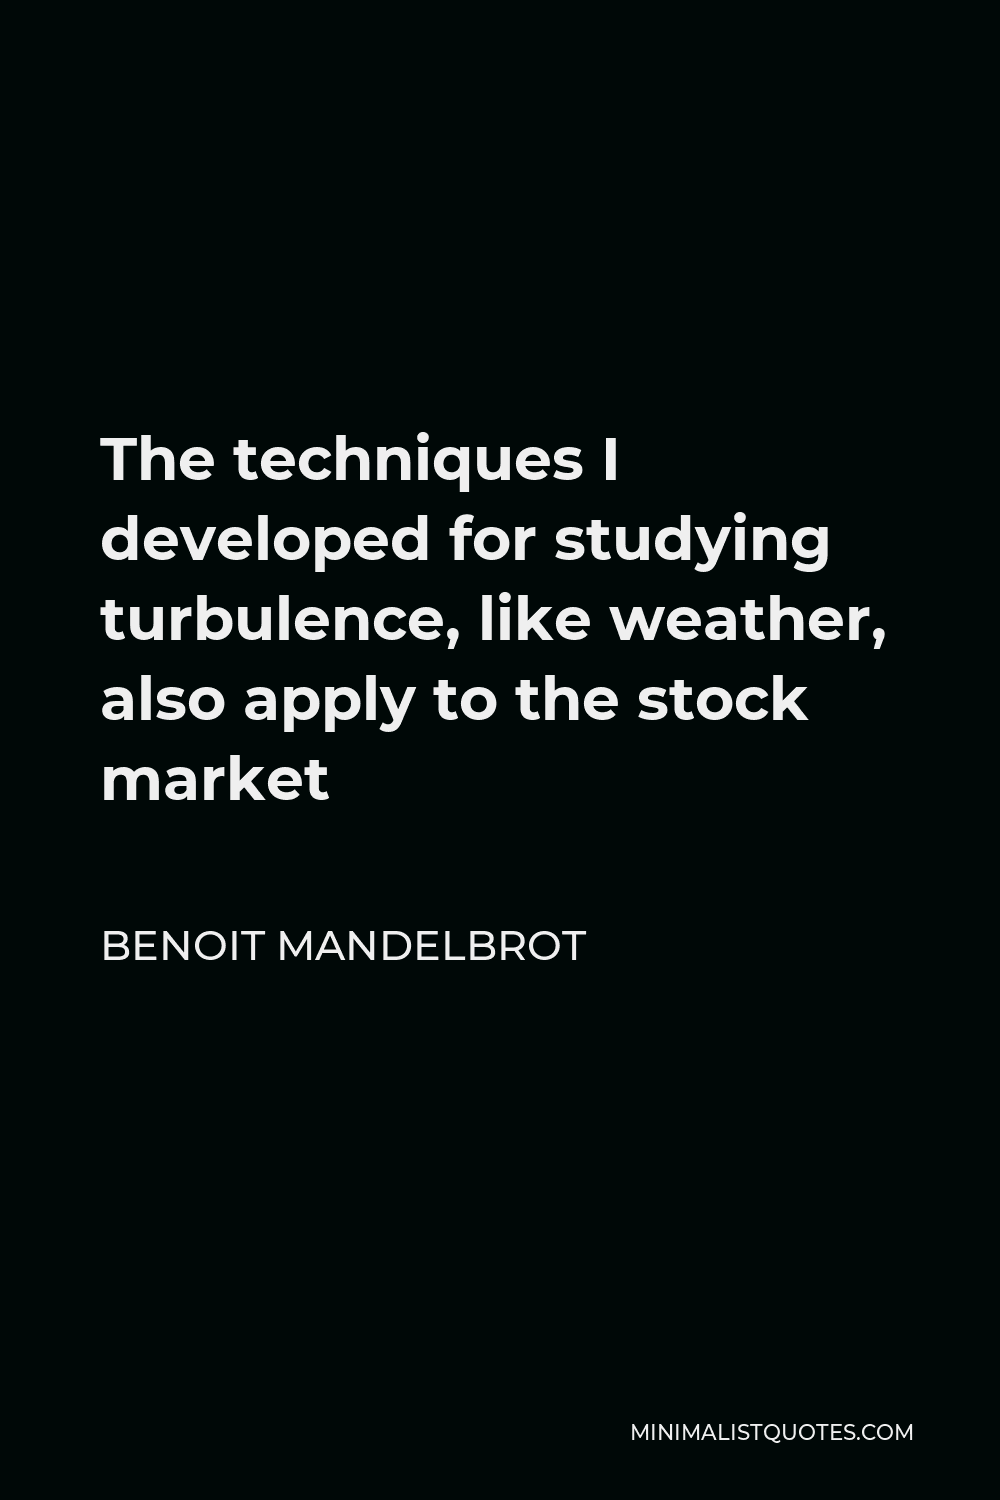 Benoit Mandelbrot Quote - The techniques I developed for studying turbulence, like weather, also apply to the stock market